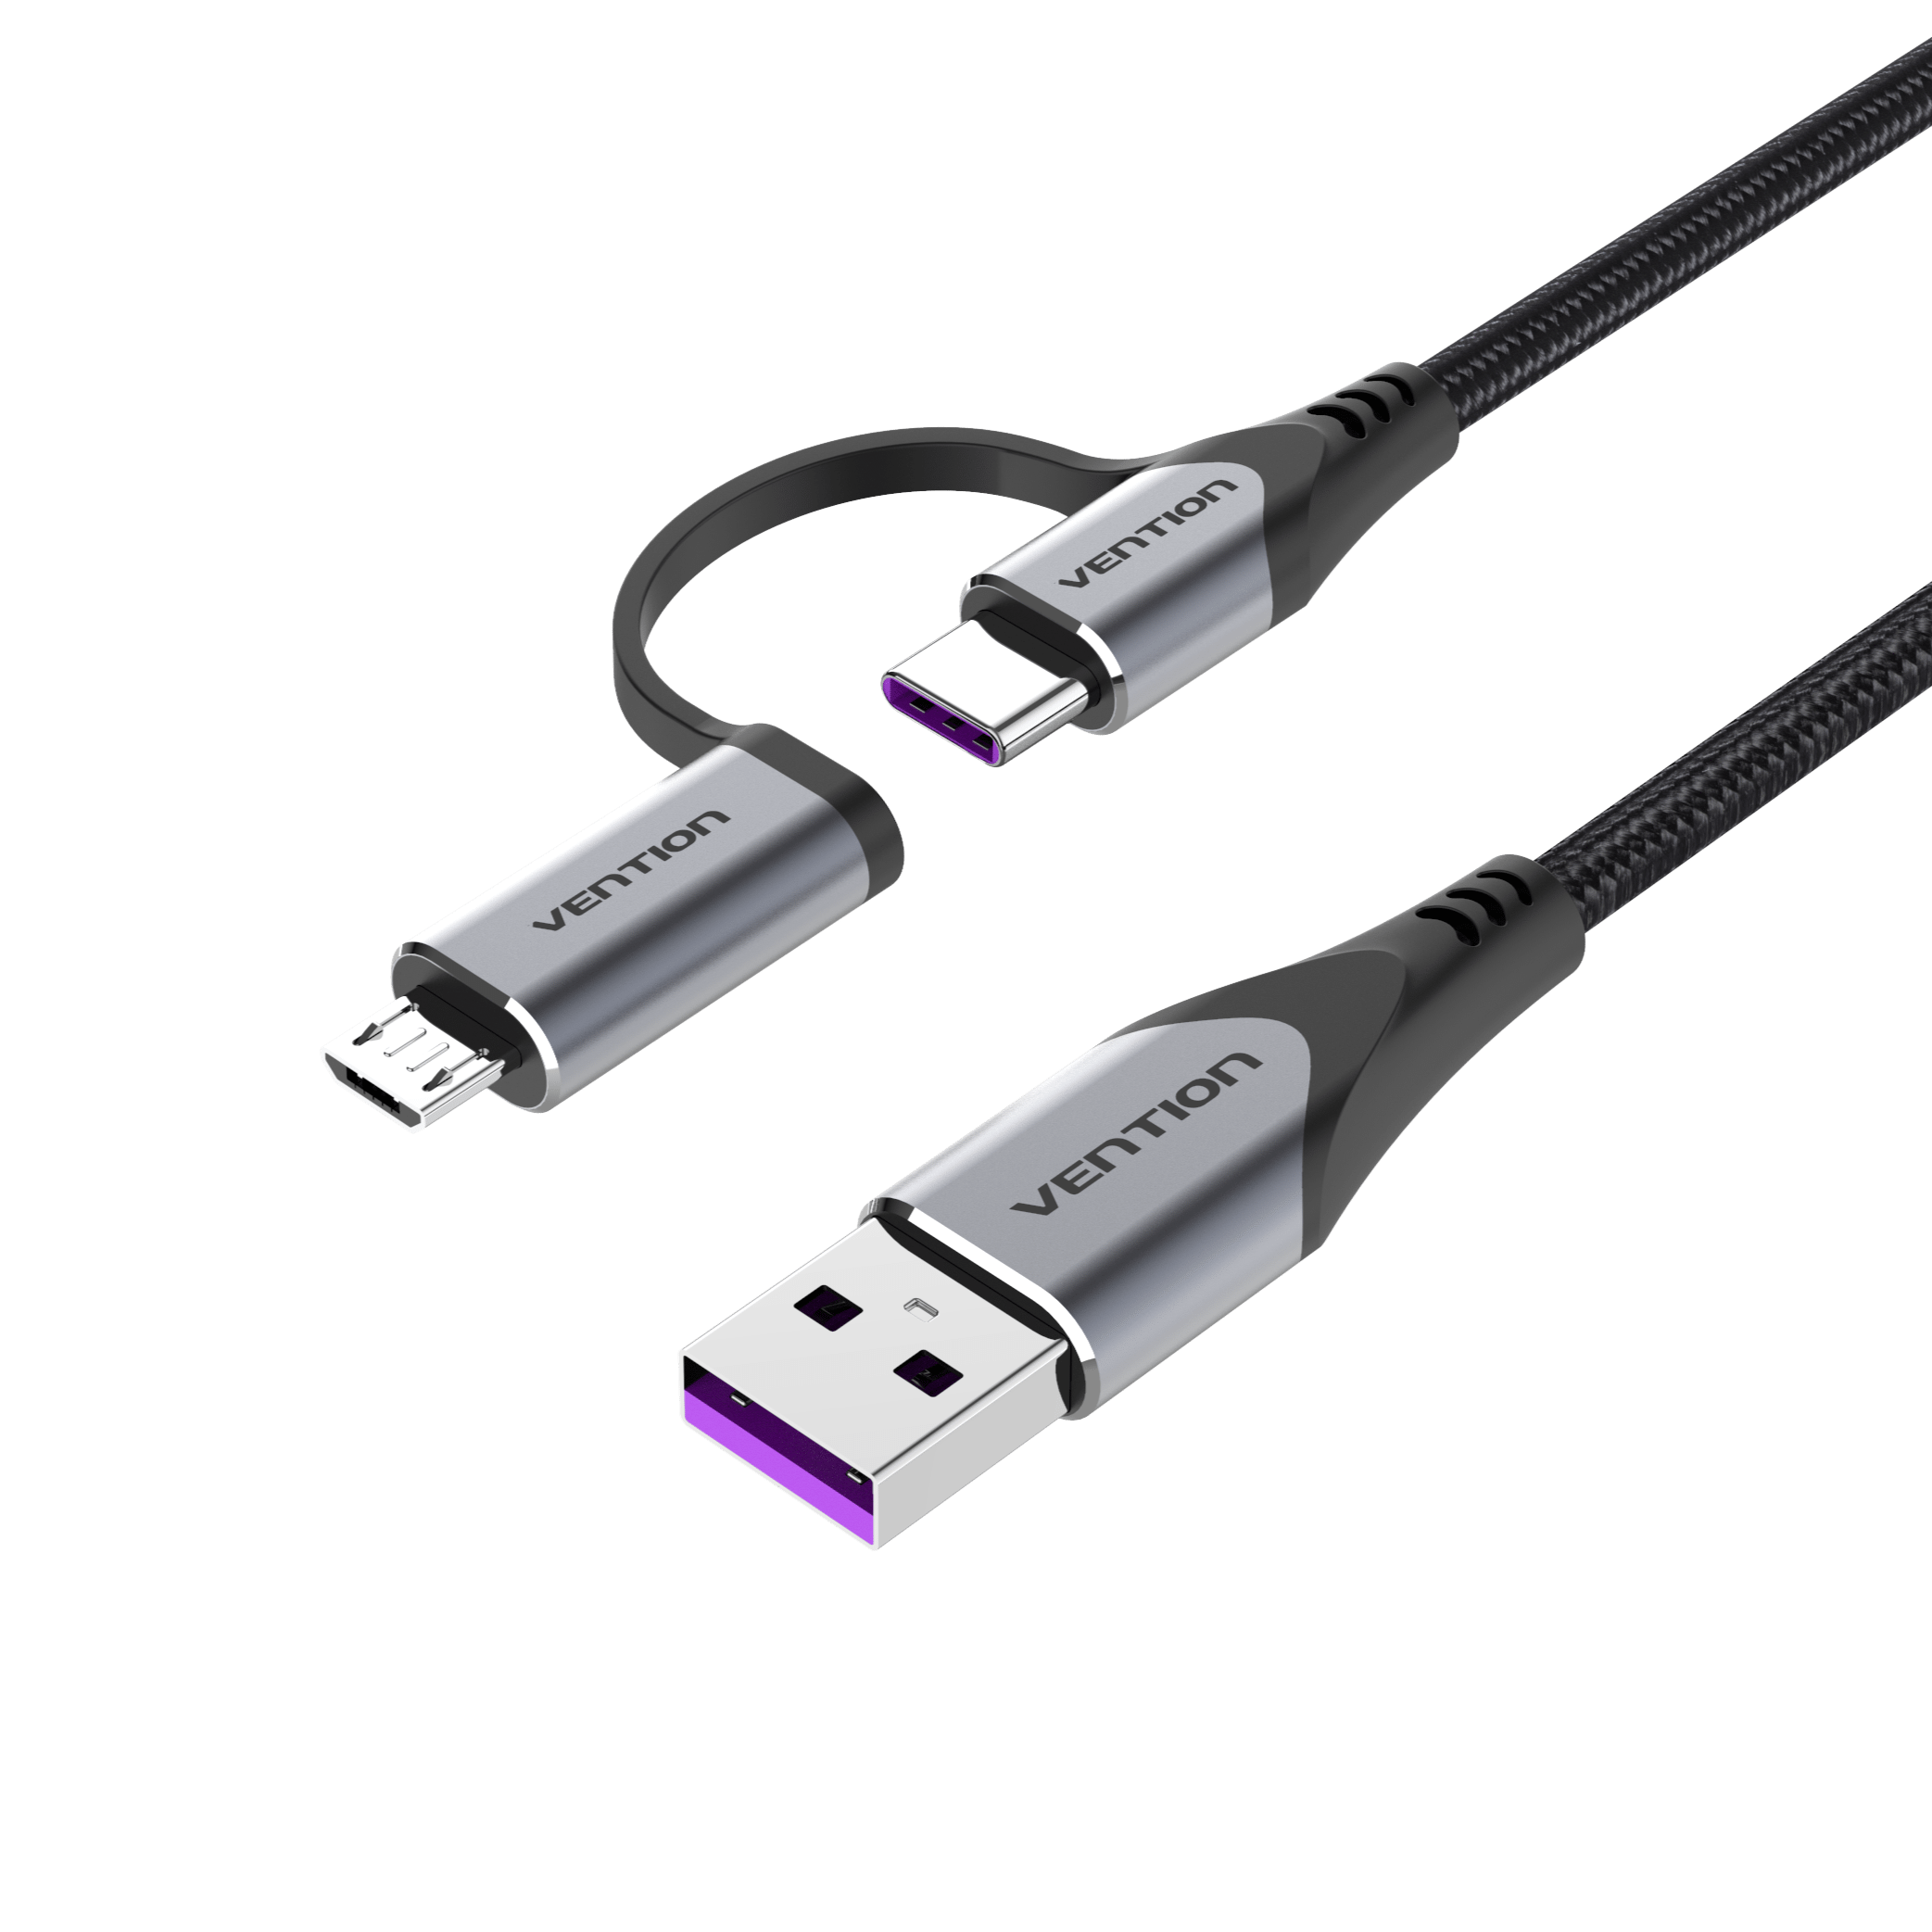 Cable Usb Tipo c Carga Rapida 5A para Movil Tablet Cable USB-C Quick  Charger